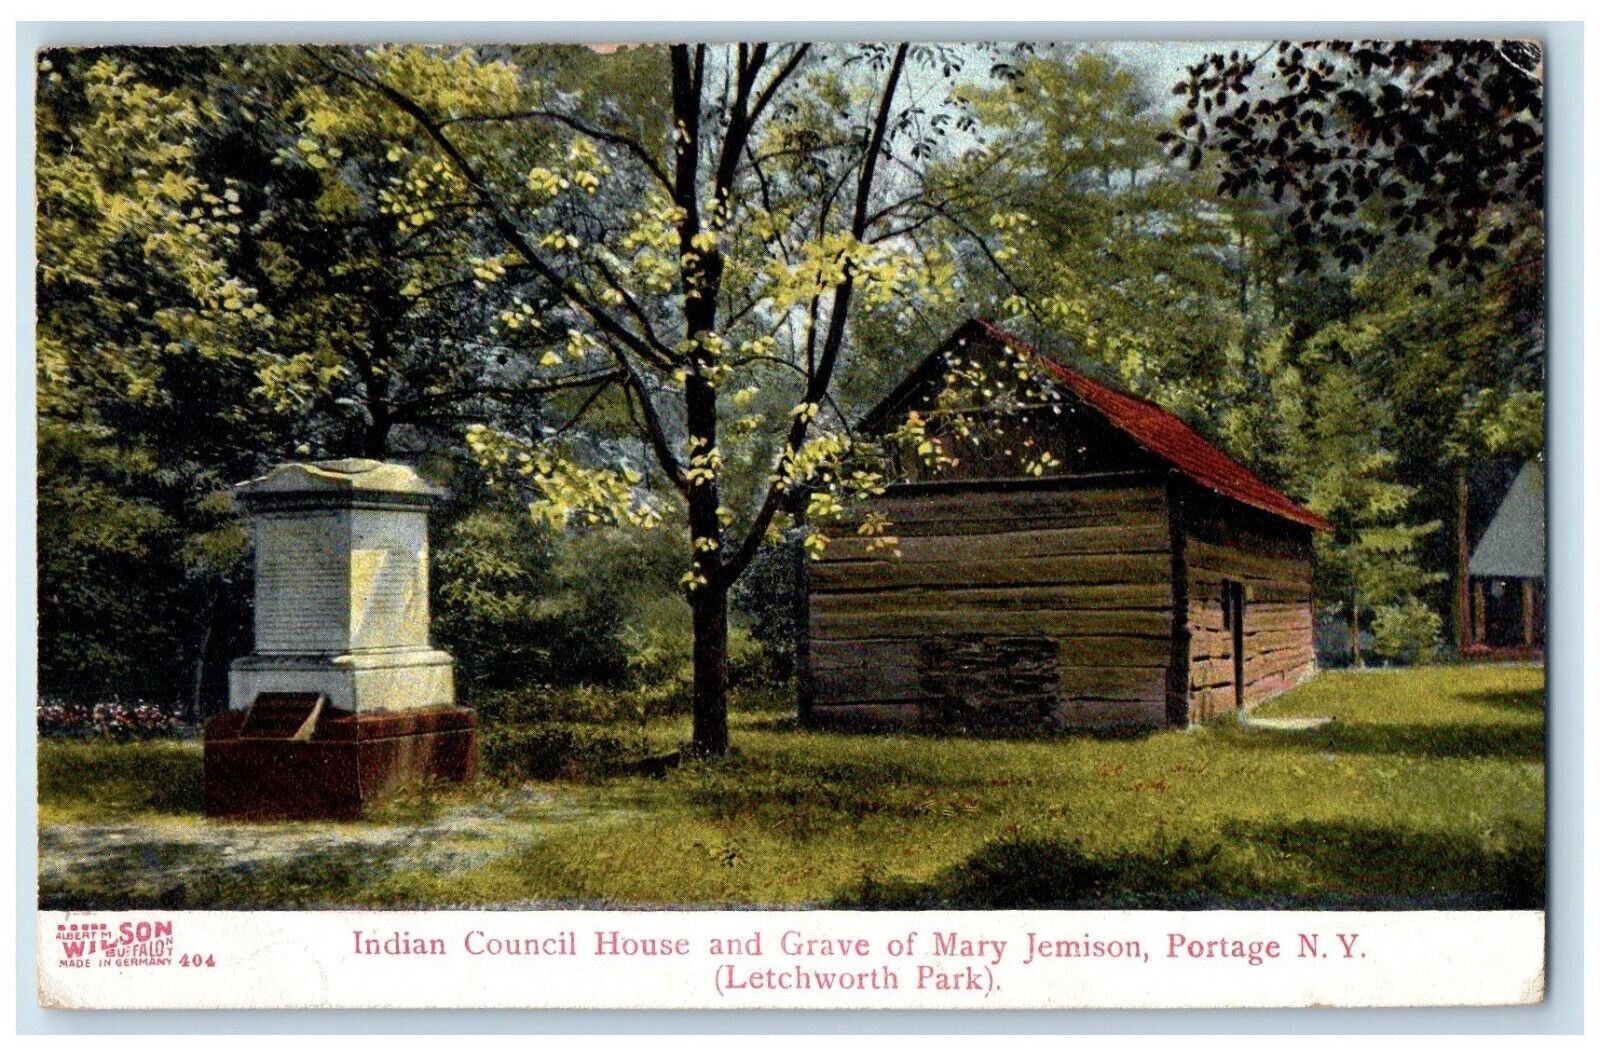 1909 Indian Council House and Grave of Mary Jemison Portage NY Postcard